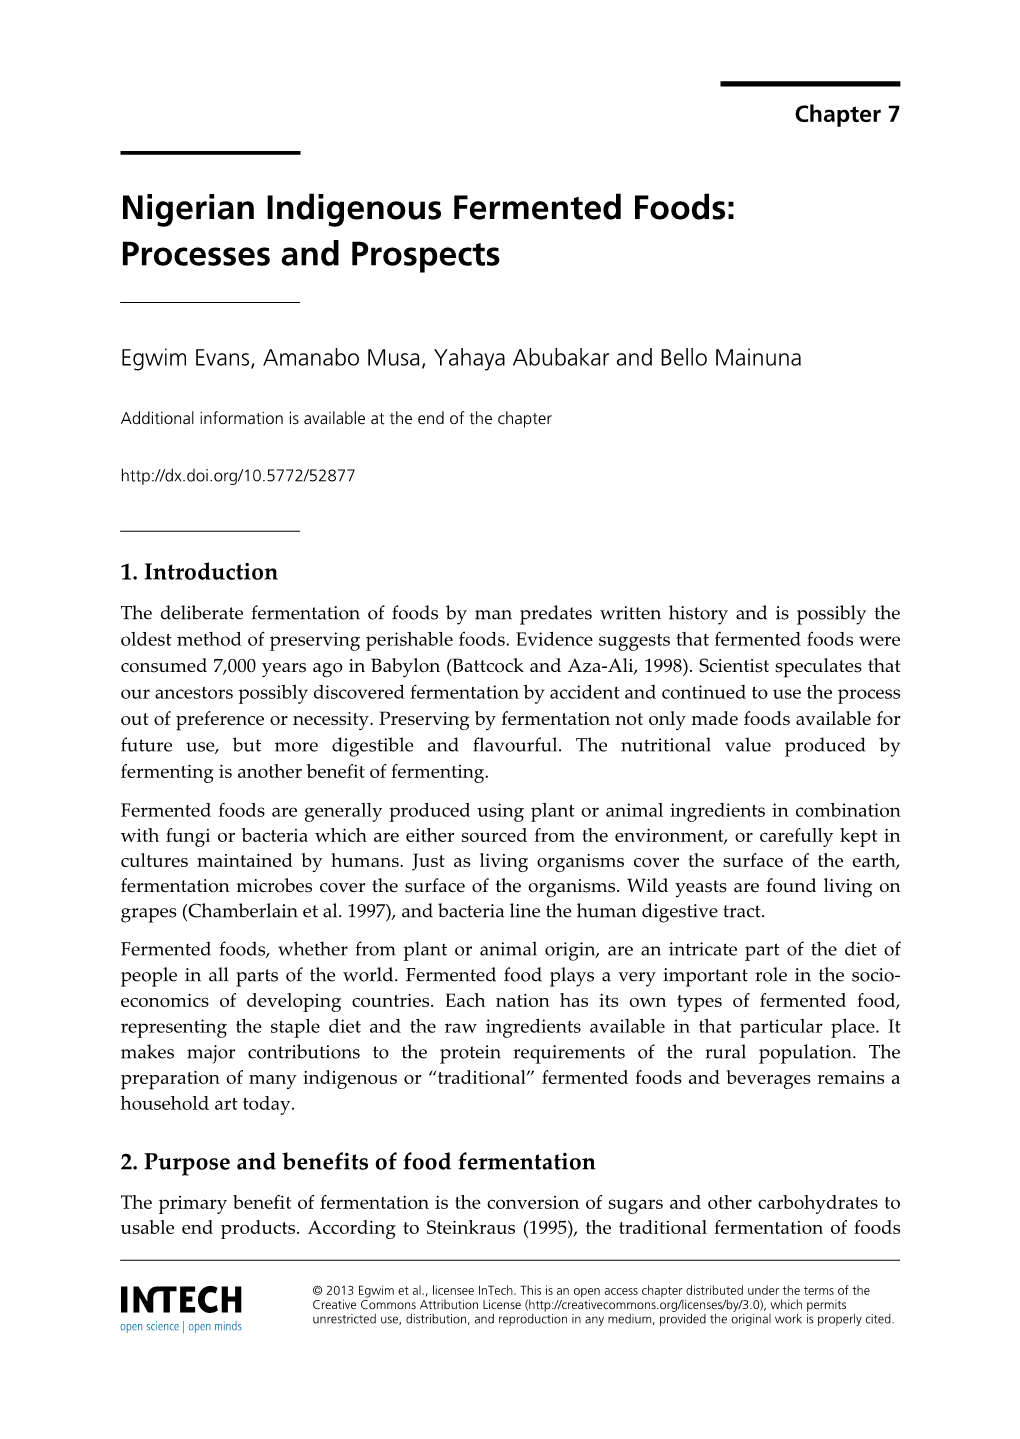 Nigerian Indigenous Fermented Foods: Processes and Prospects